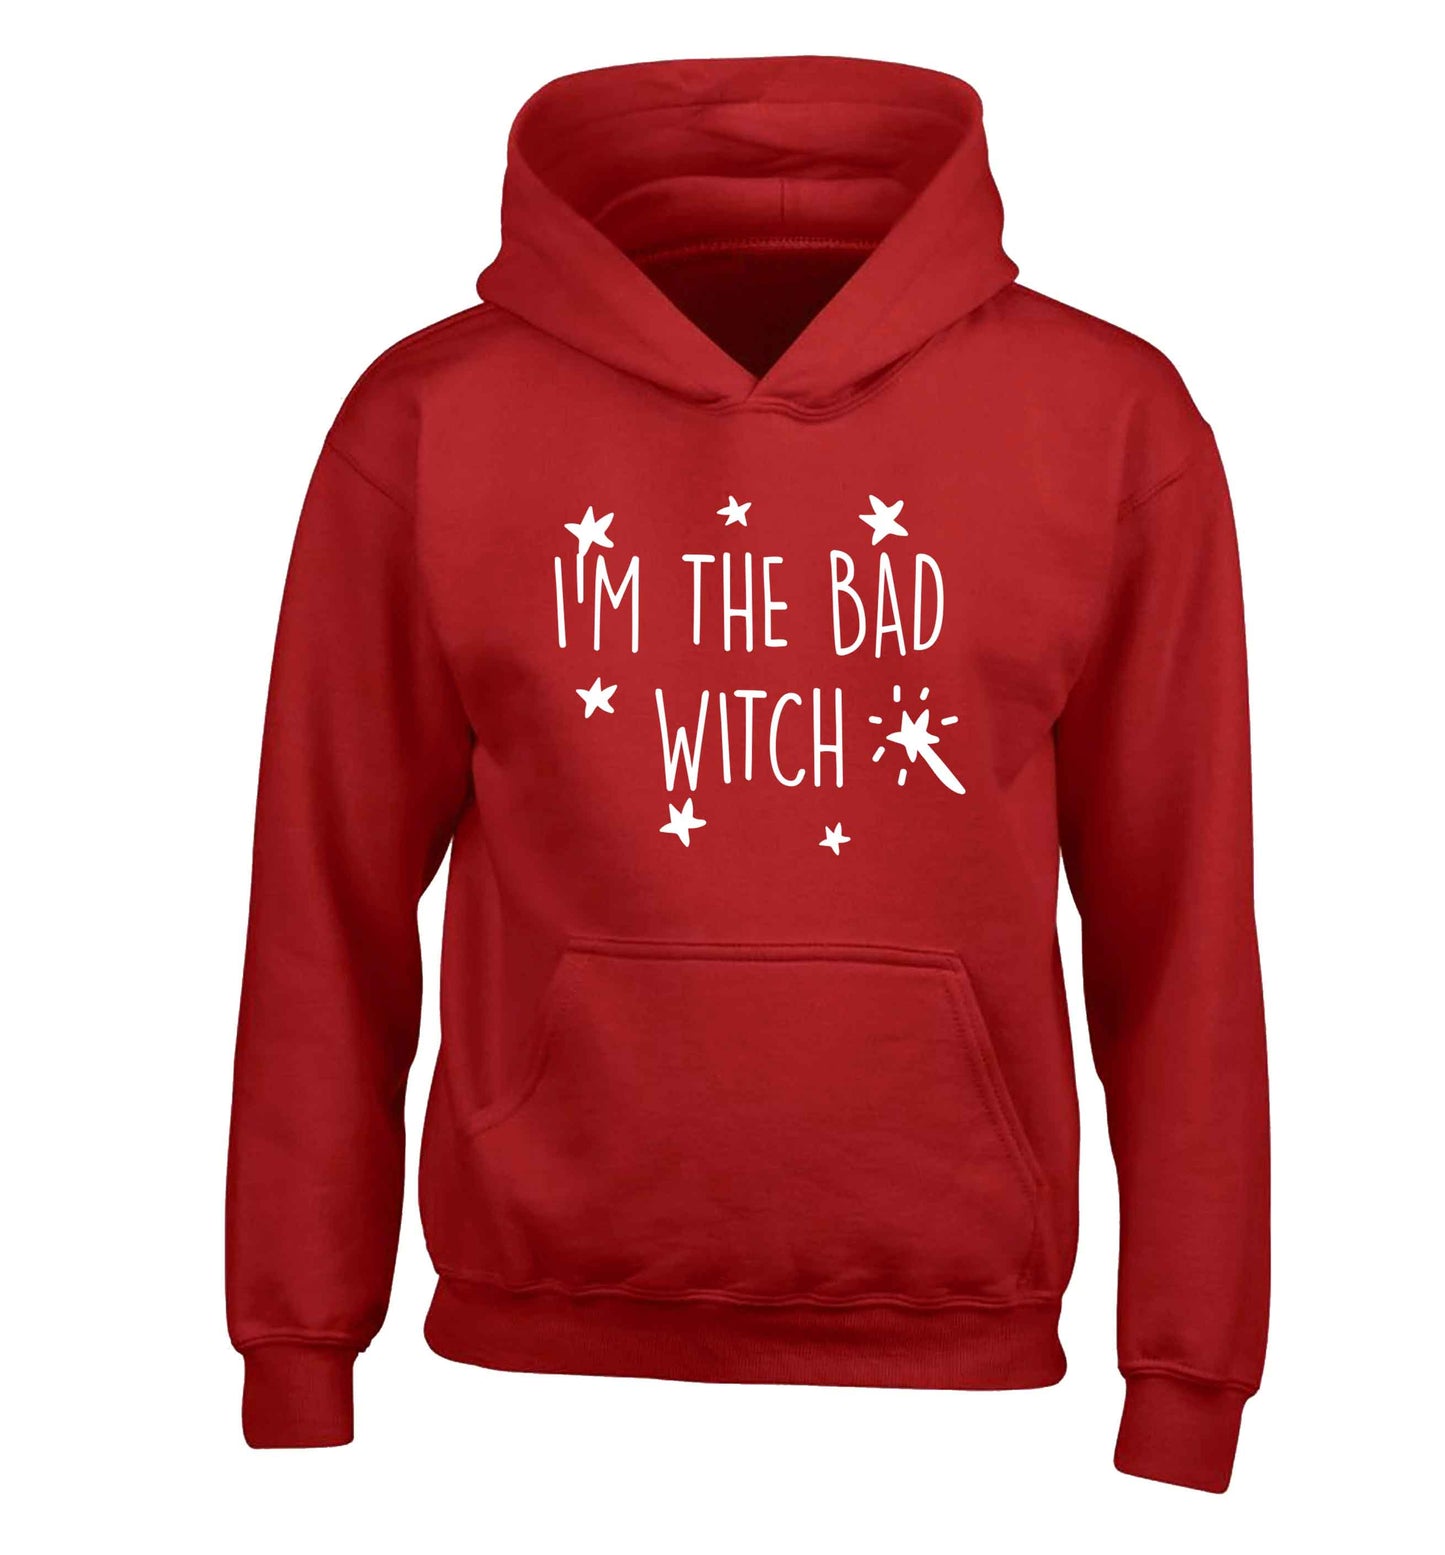 Bad witch children's red hoodie 12-13 Years